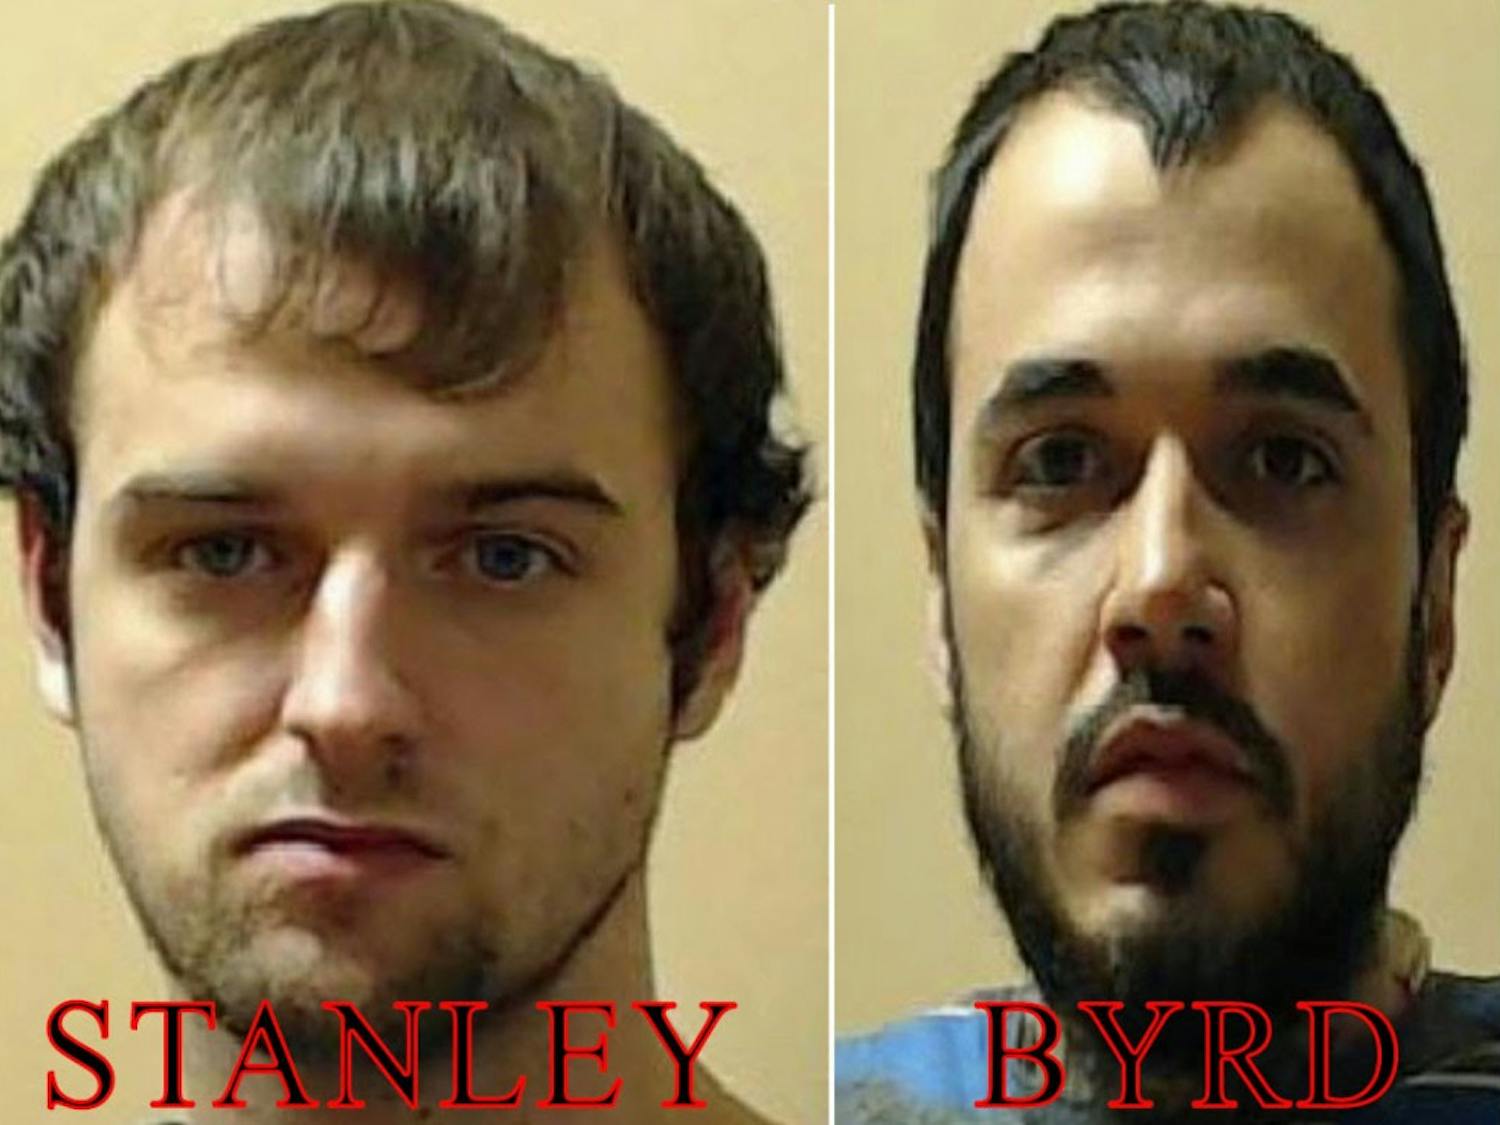 Inmates Justin Stanley and and Troy Byrd escaped from a Nelsonville prison and remain at large (provided via SEPTA).